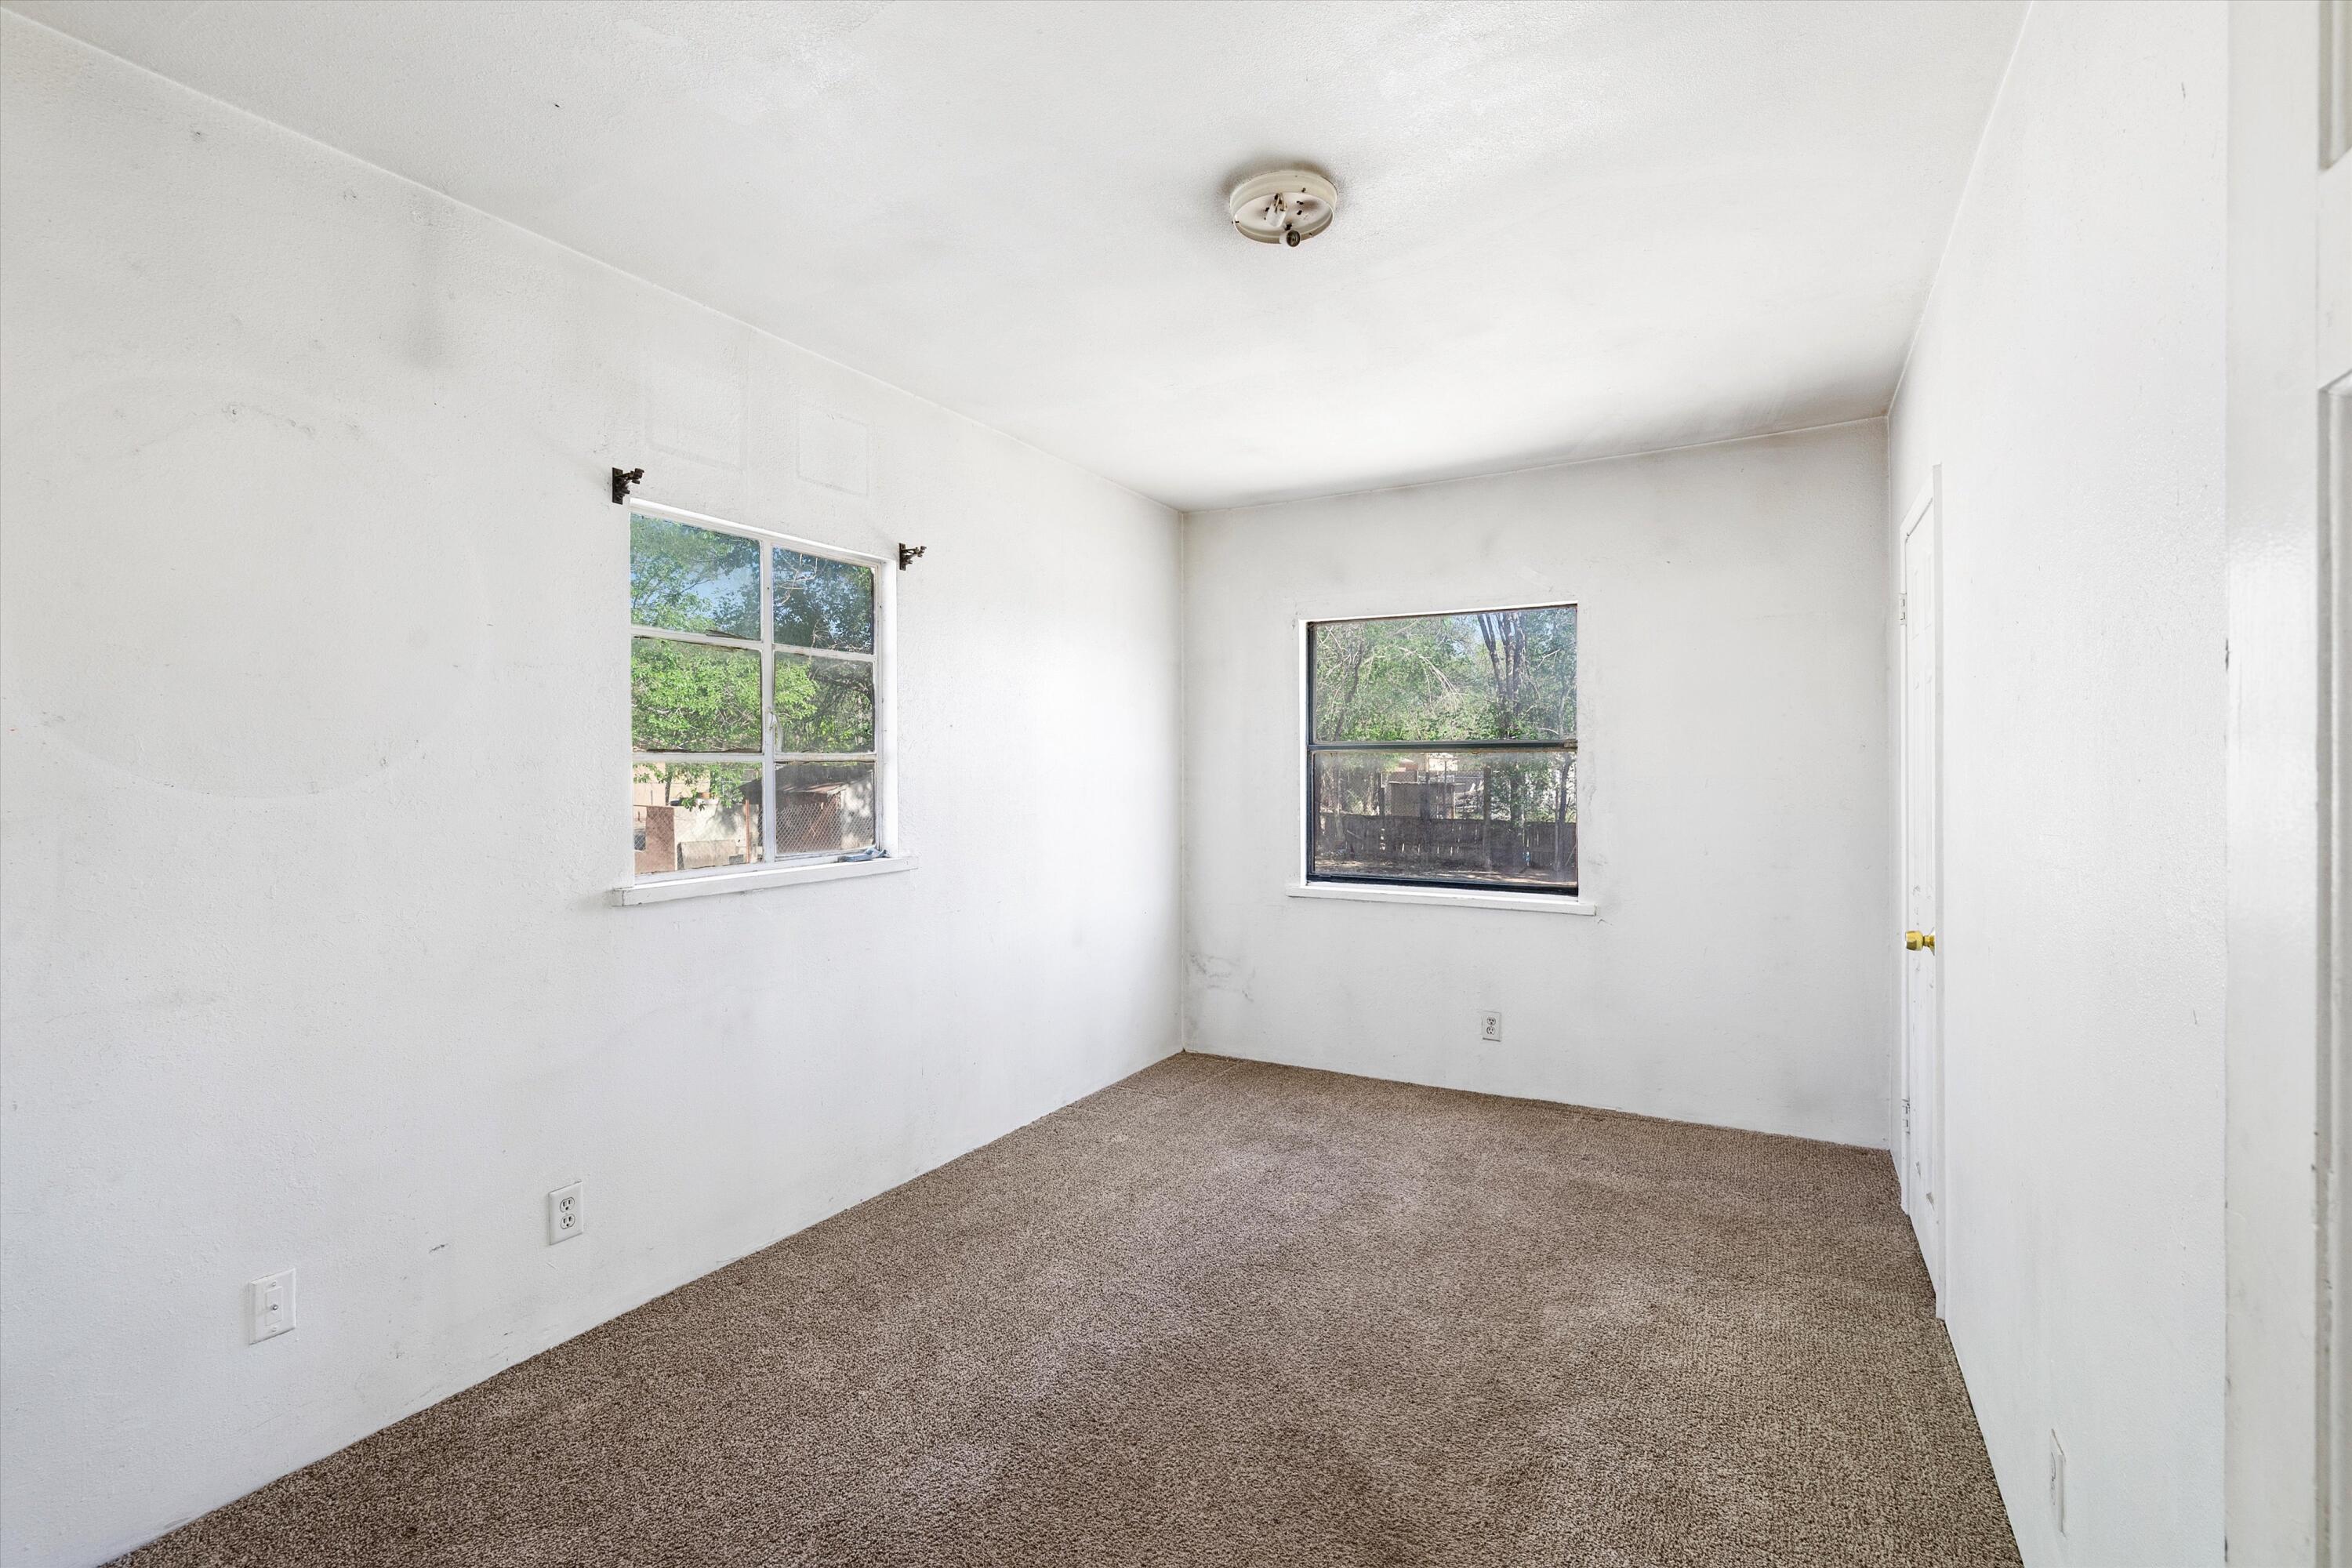 711 Hardy Avenue SW, Albuquerque, New Mexico 87105, 2 Bedrooms Bedrooms, ,1 BathroomBathrooms,Residential,For Sale,711 Hardy Avenue SW,1061513